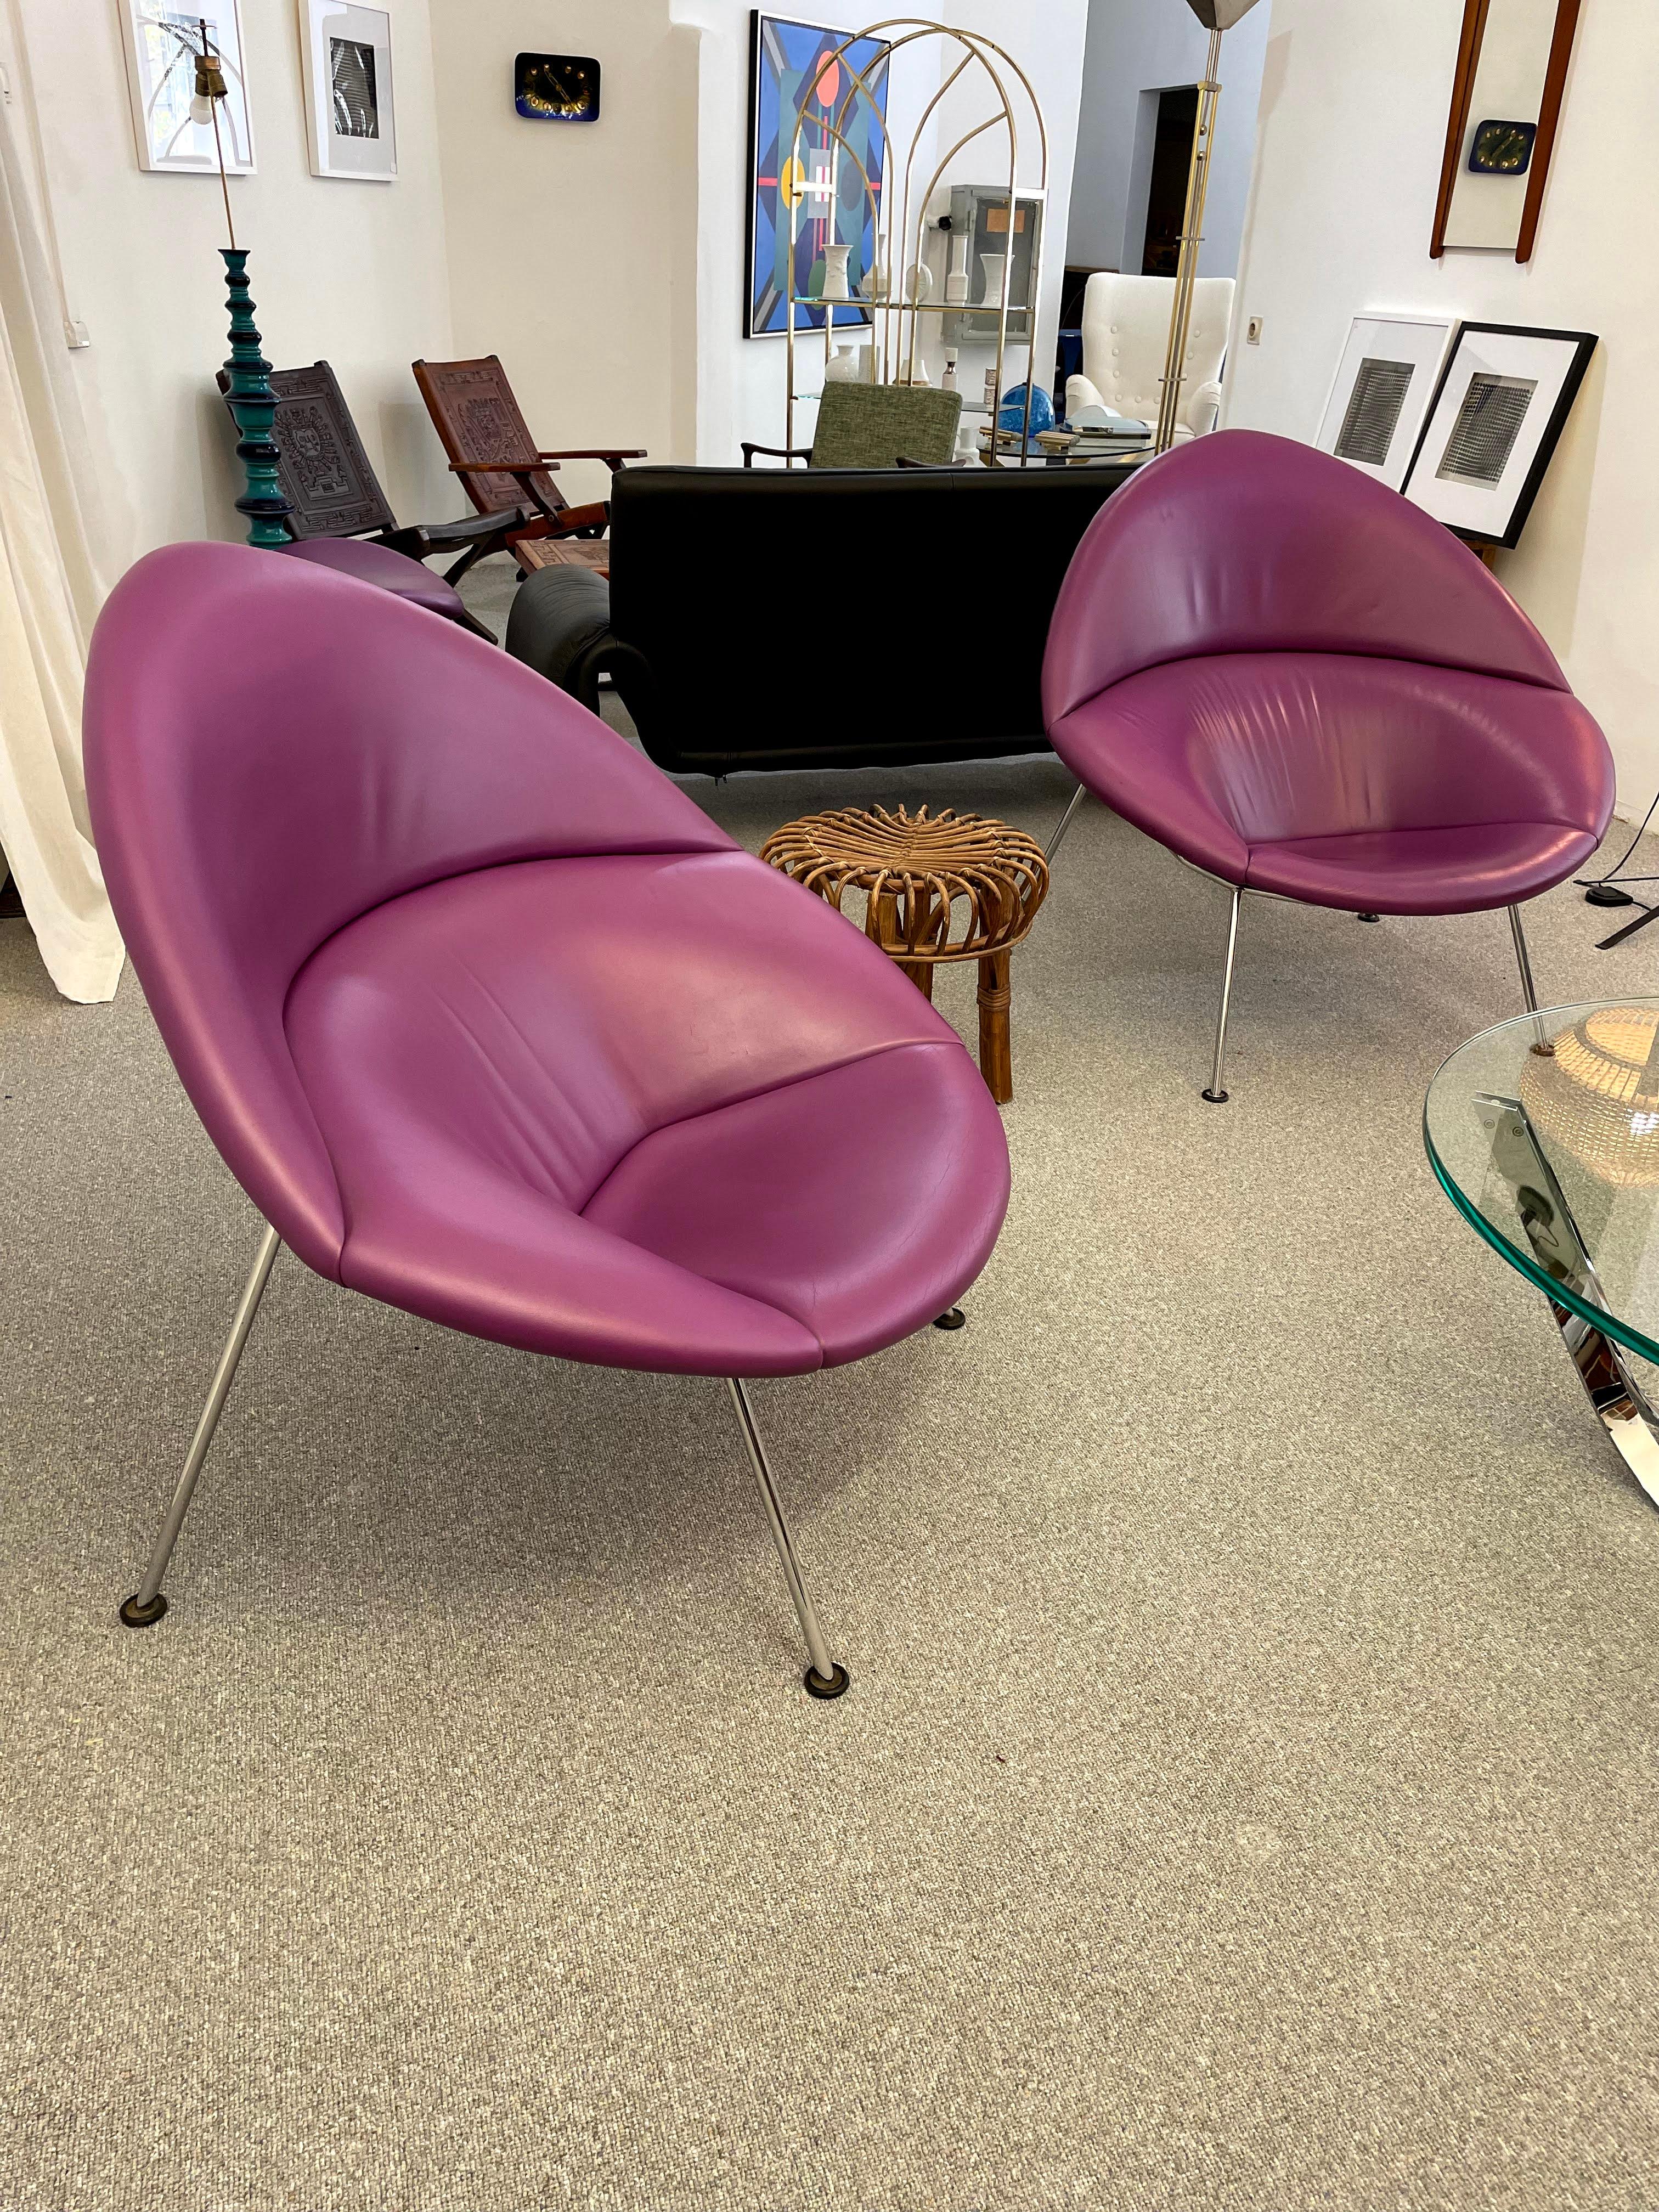 Pierre Paulin globe lounge chair and ottoman by Artifort. 
With its elegantly rounded shell on a chromed tubular base, the globe chaise has all the qualities of a comfortable modern chaise.
The globe lounge chair was designed by French designer